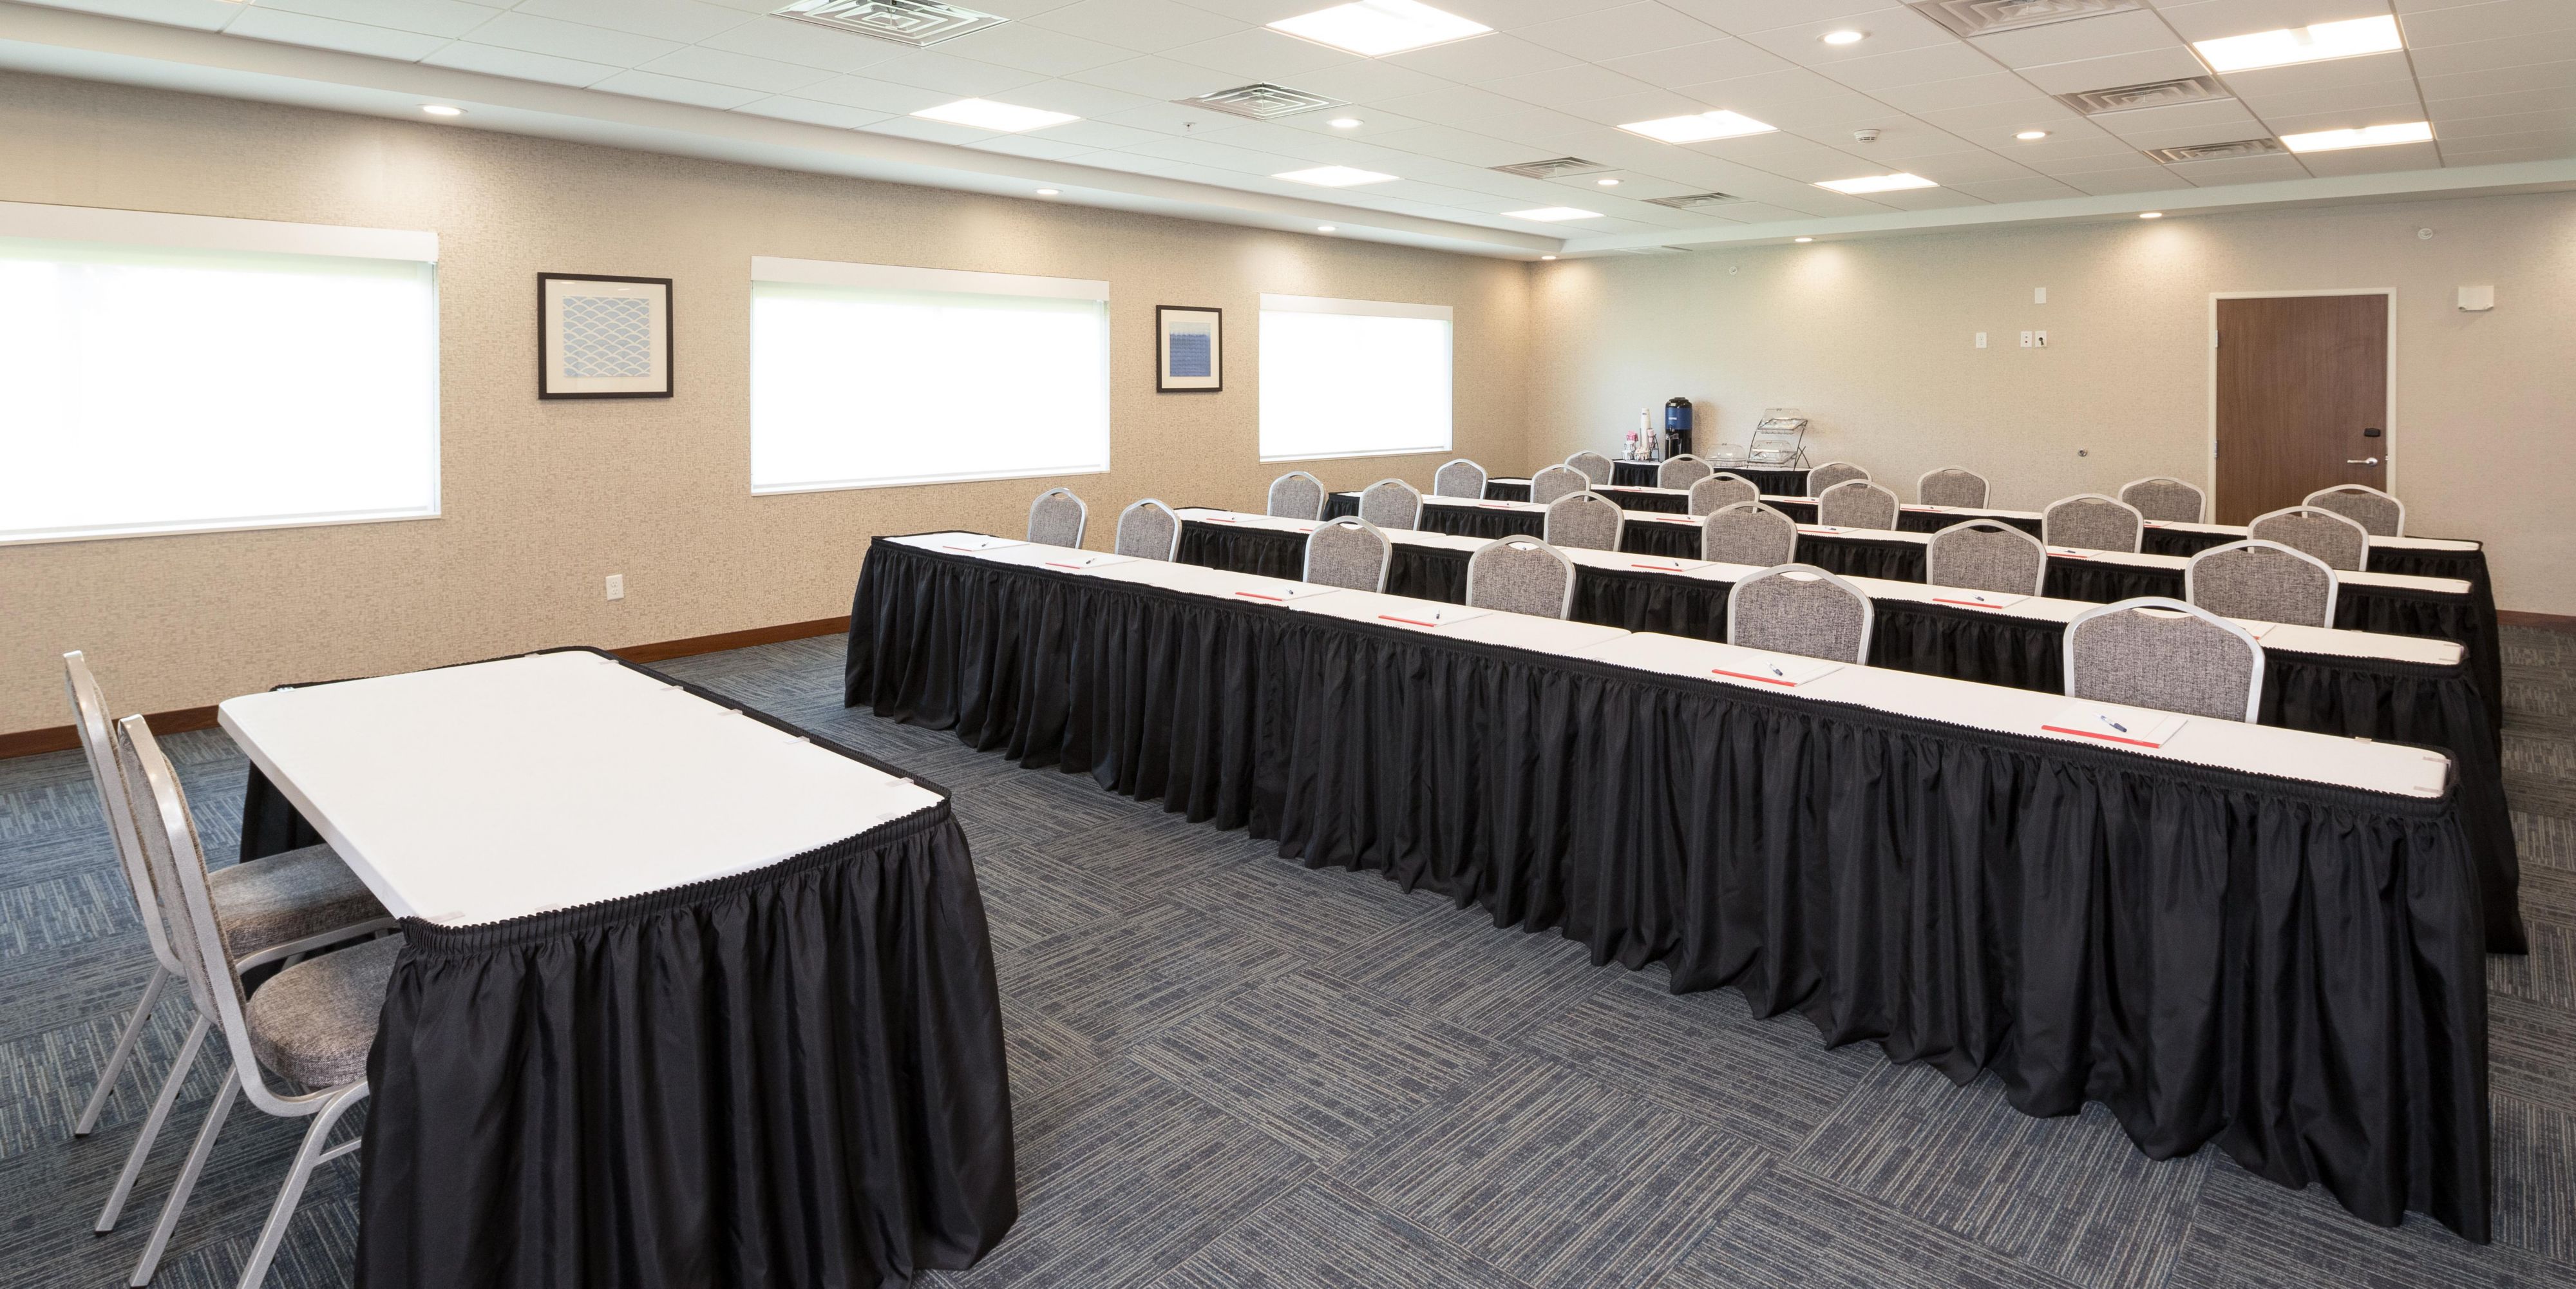 Our 1200 Sq Ft Meeting Room is perfect to hold business meetings or specials events. Please contact the hotel for details, pricing and availability. 